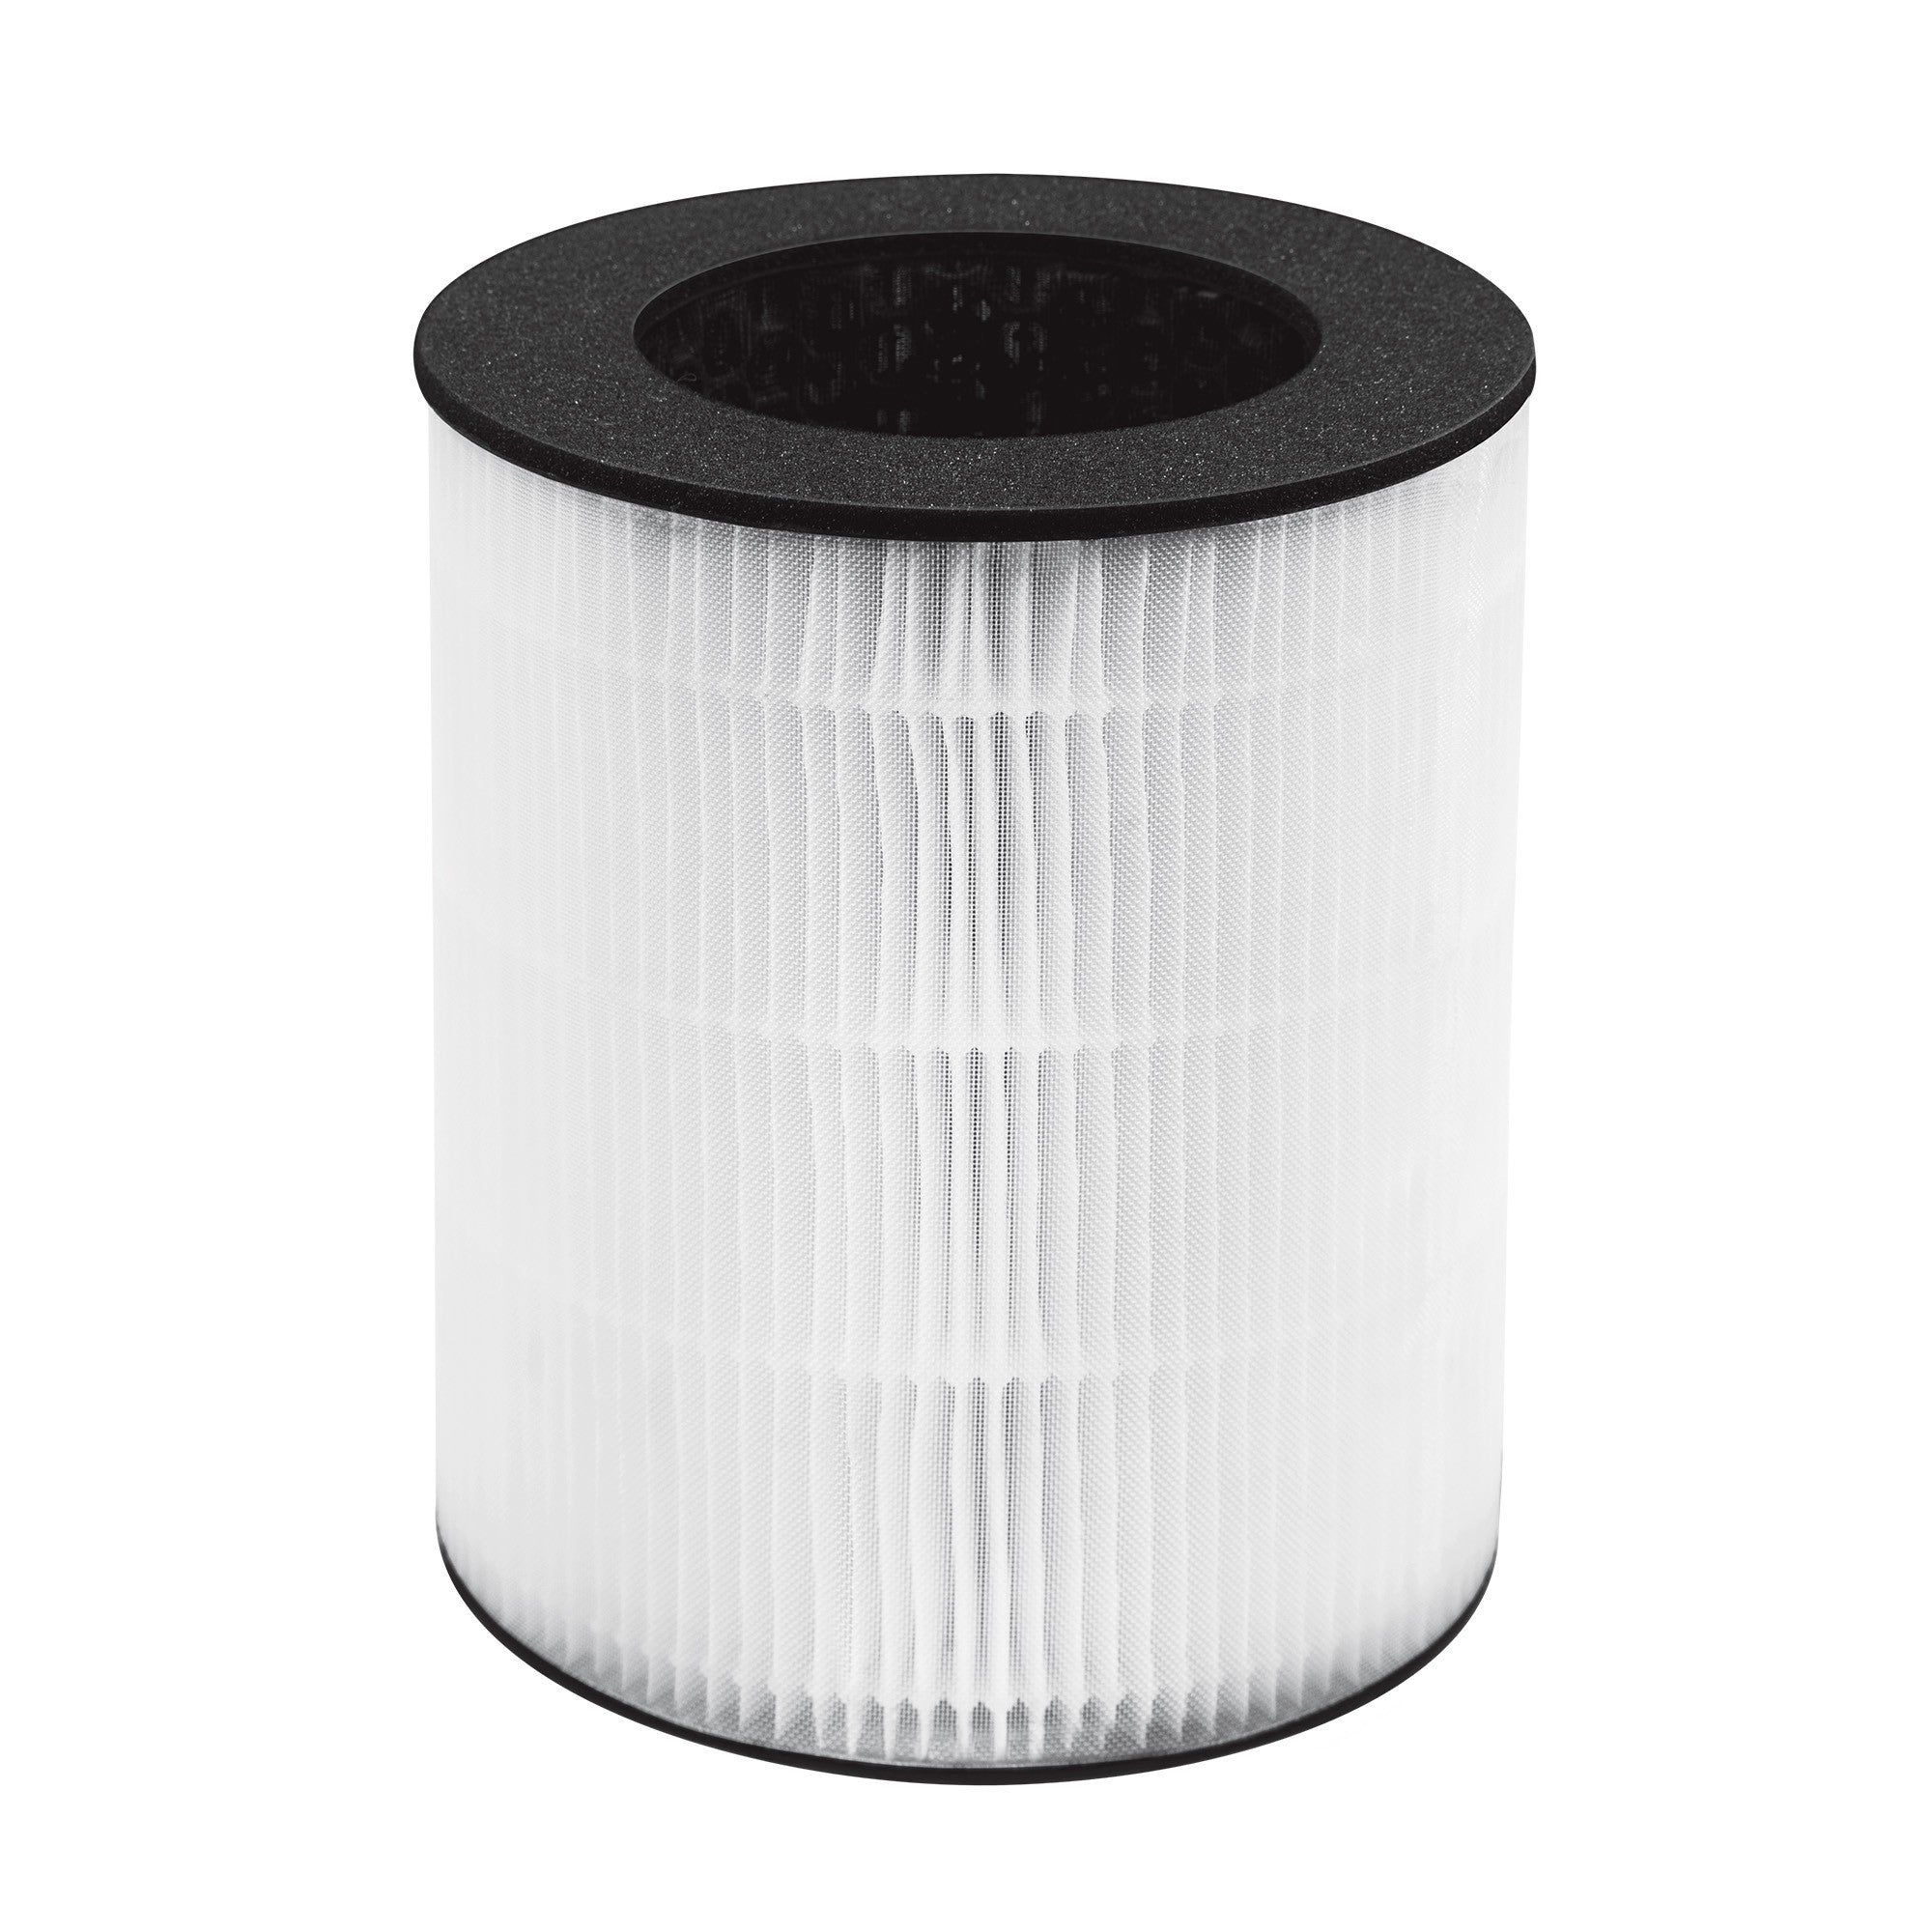 Homedics TotalClean 5 in 1 Tower Air Purifier Replacement Filter - for Small AP-T20WT-CA - 15-11930